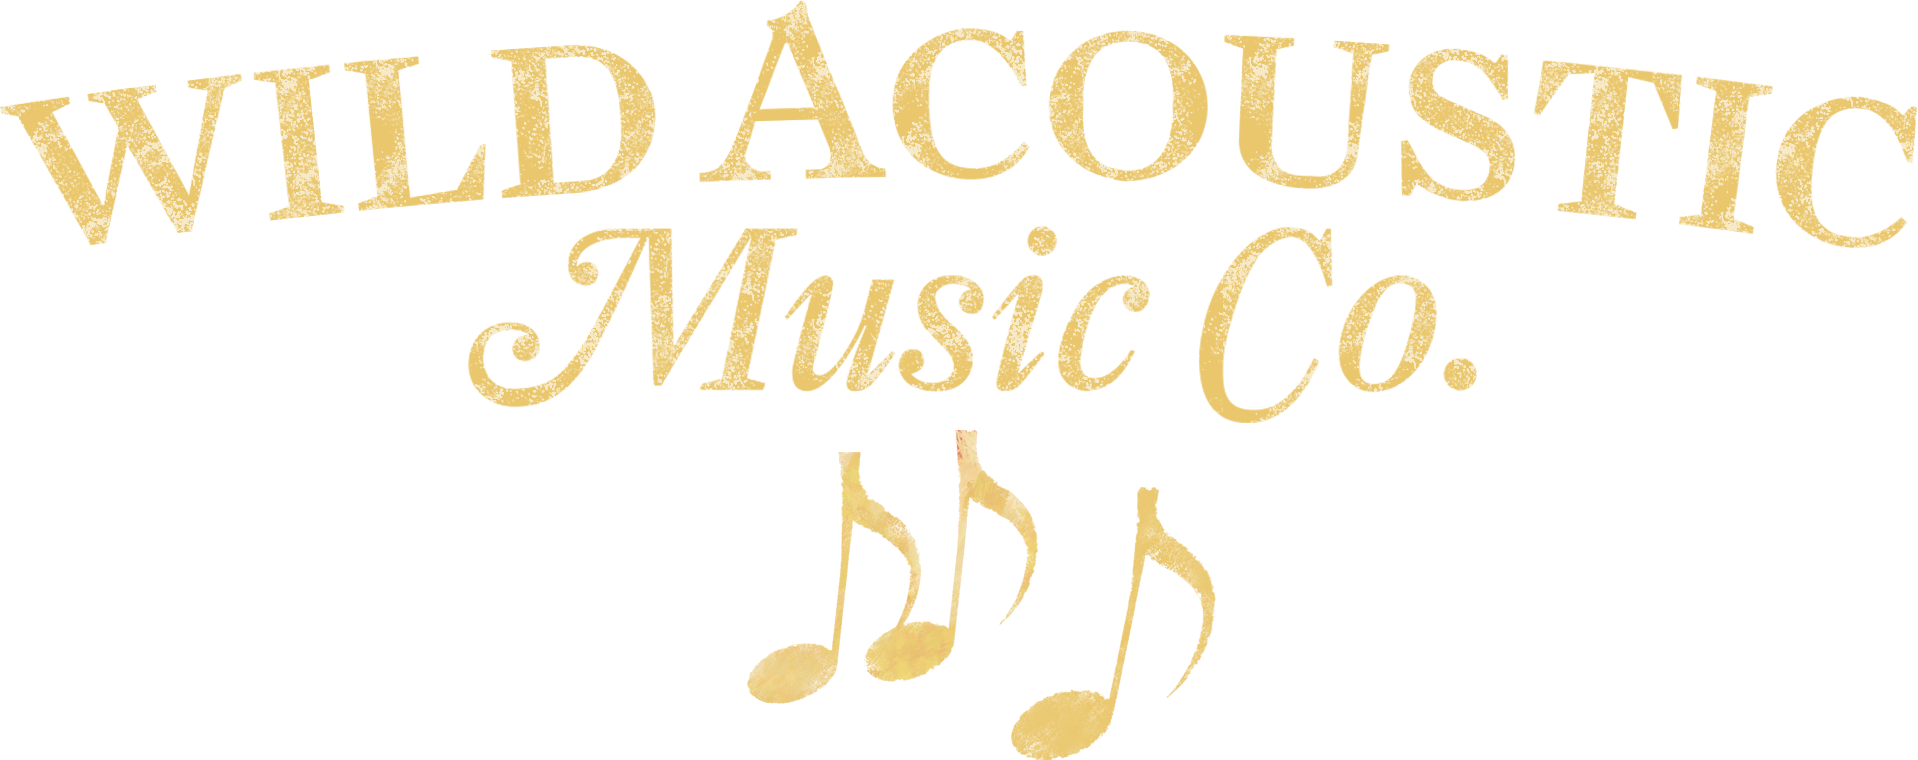 Wild Acoustic Music Co